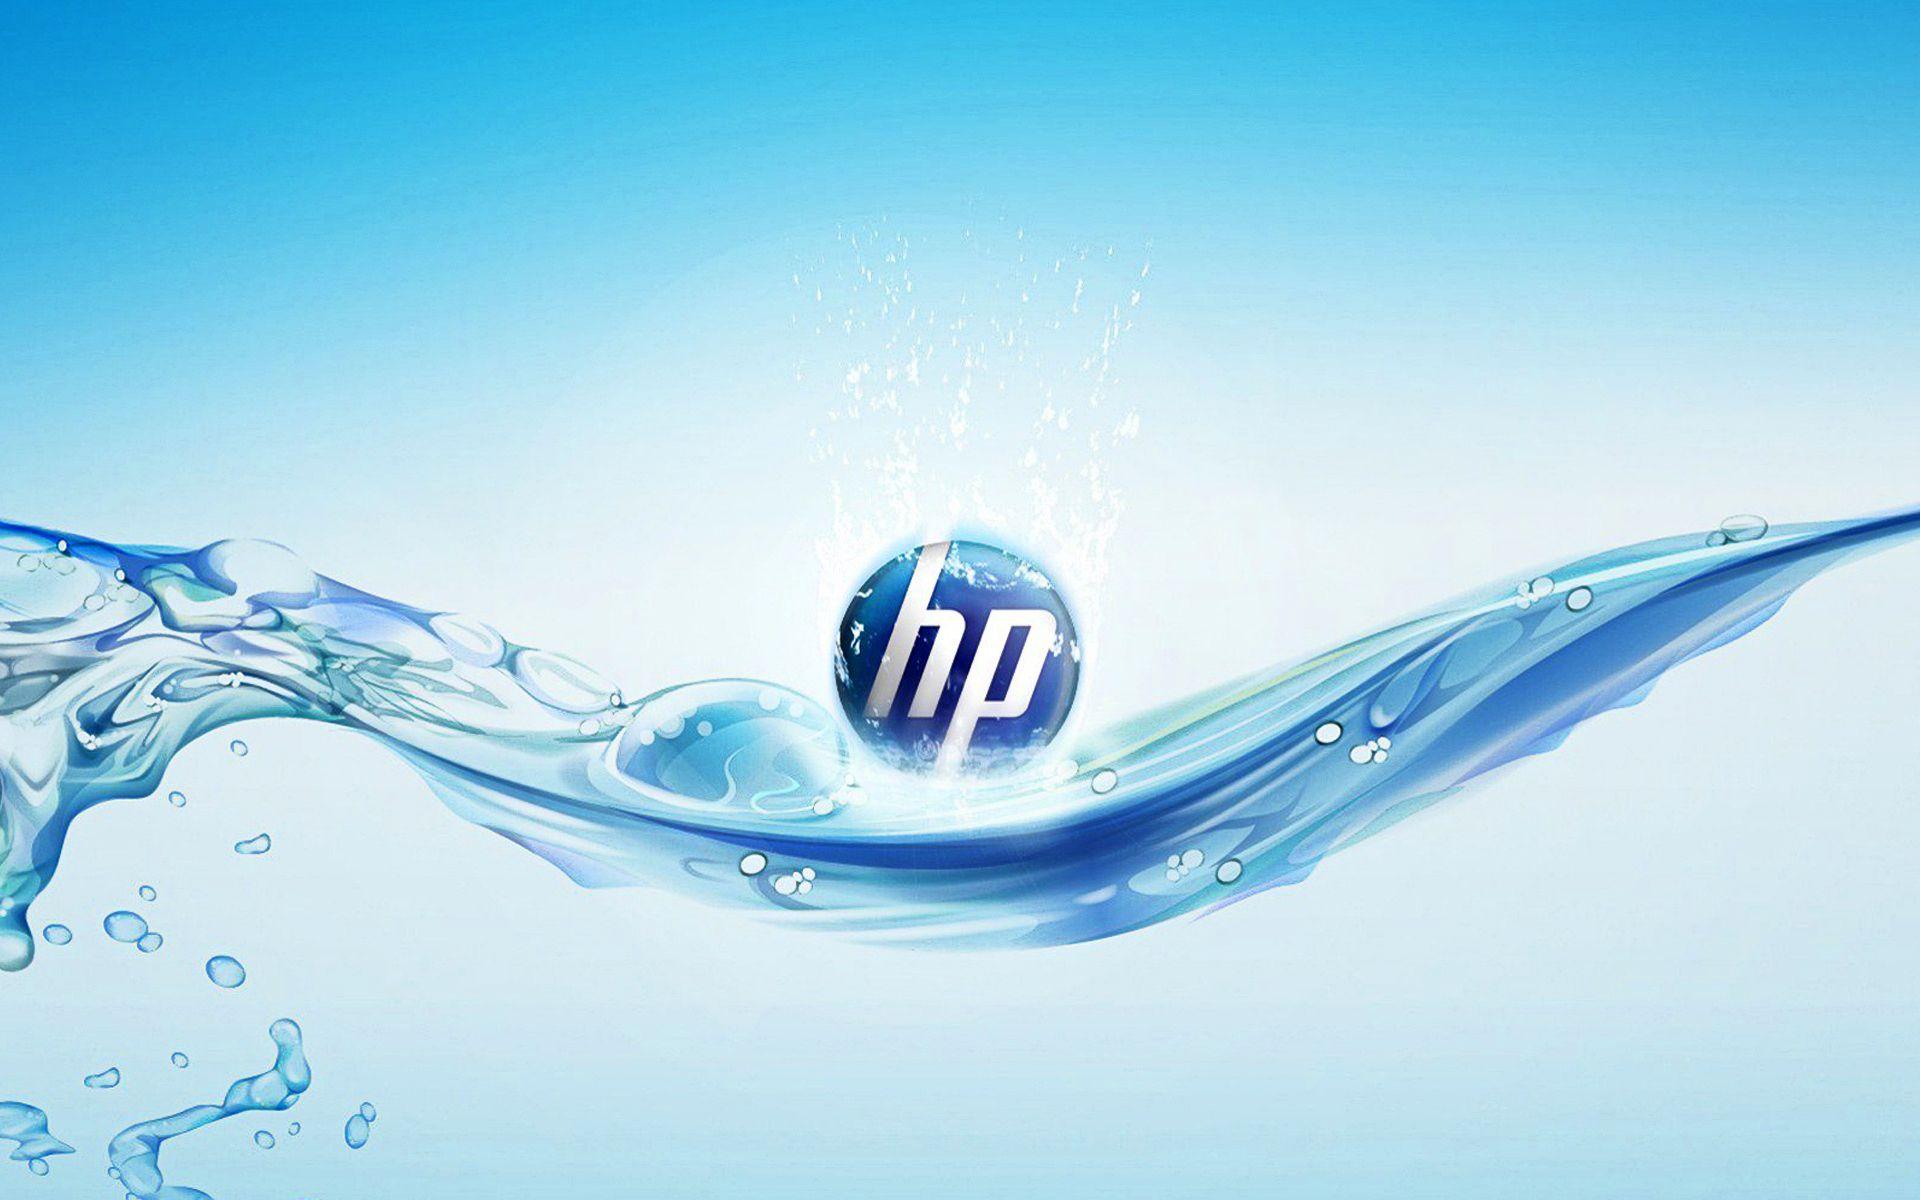 Cute HP Logo - Logo Cool and Free Wallpapers for Download at WallpaperLepi.com | Page 0